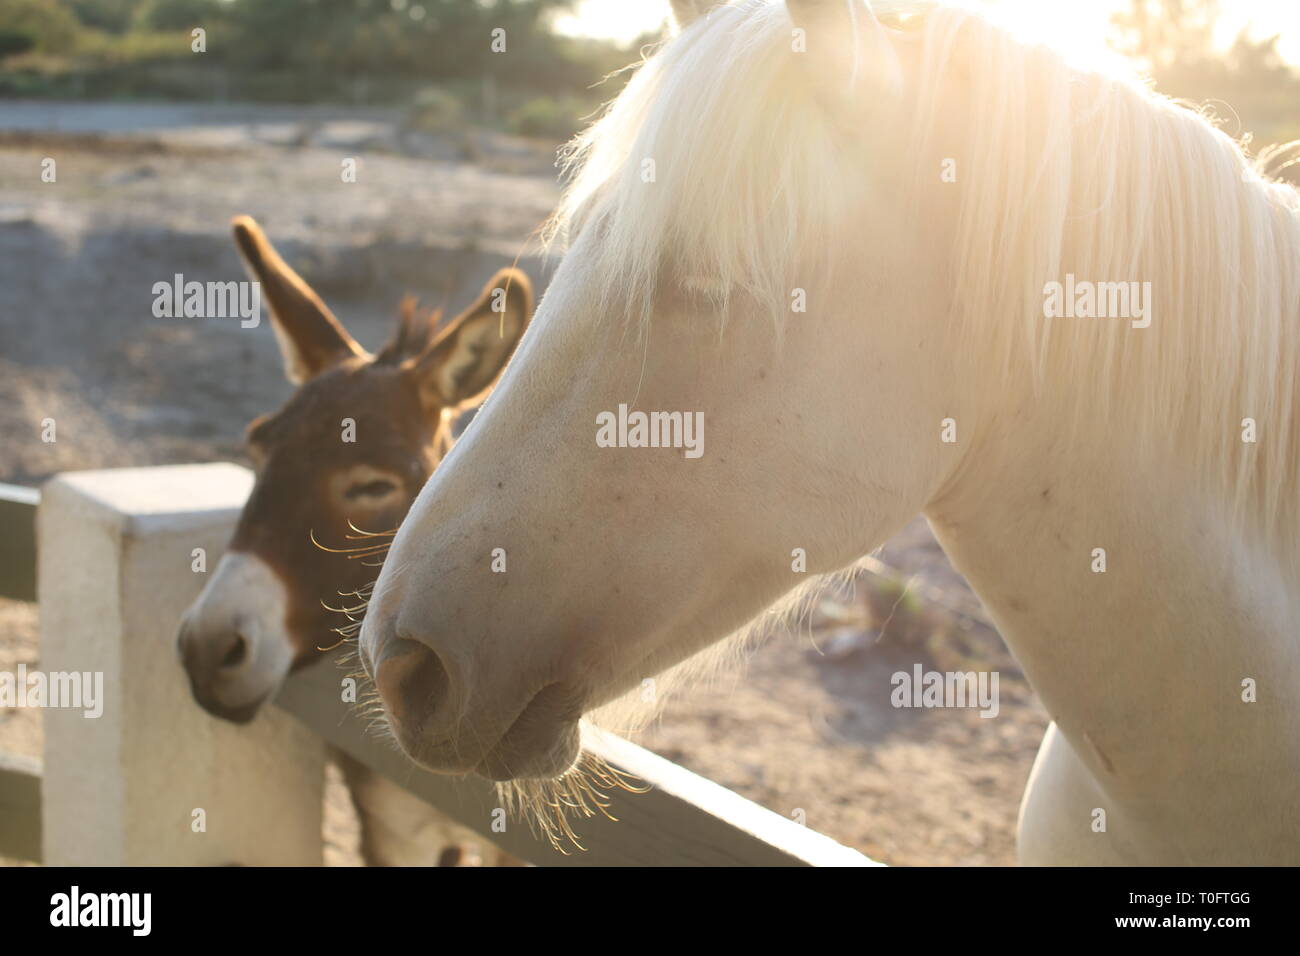 Beautiful white horse with long mane with a young brown donkey friend waiting at a picket fence in the setting sun Stock Photo